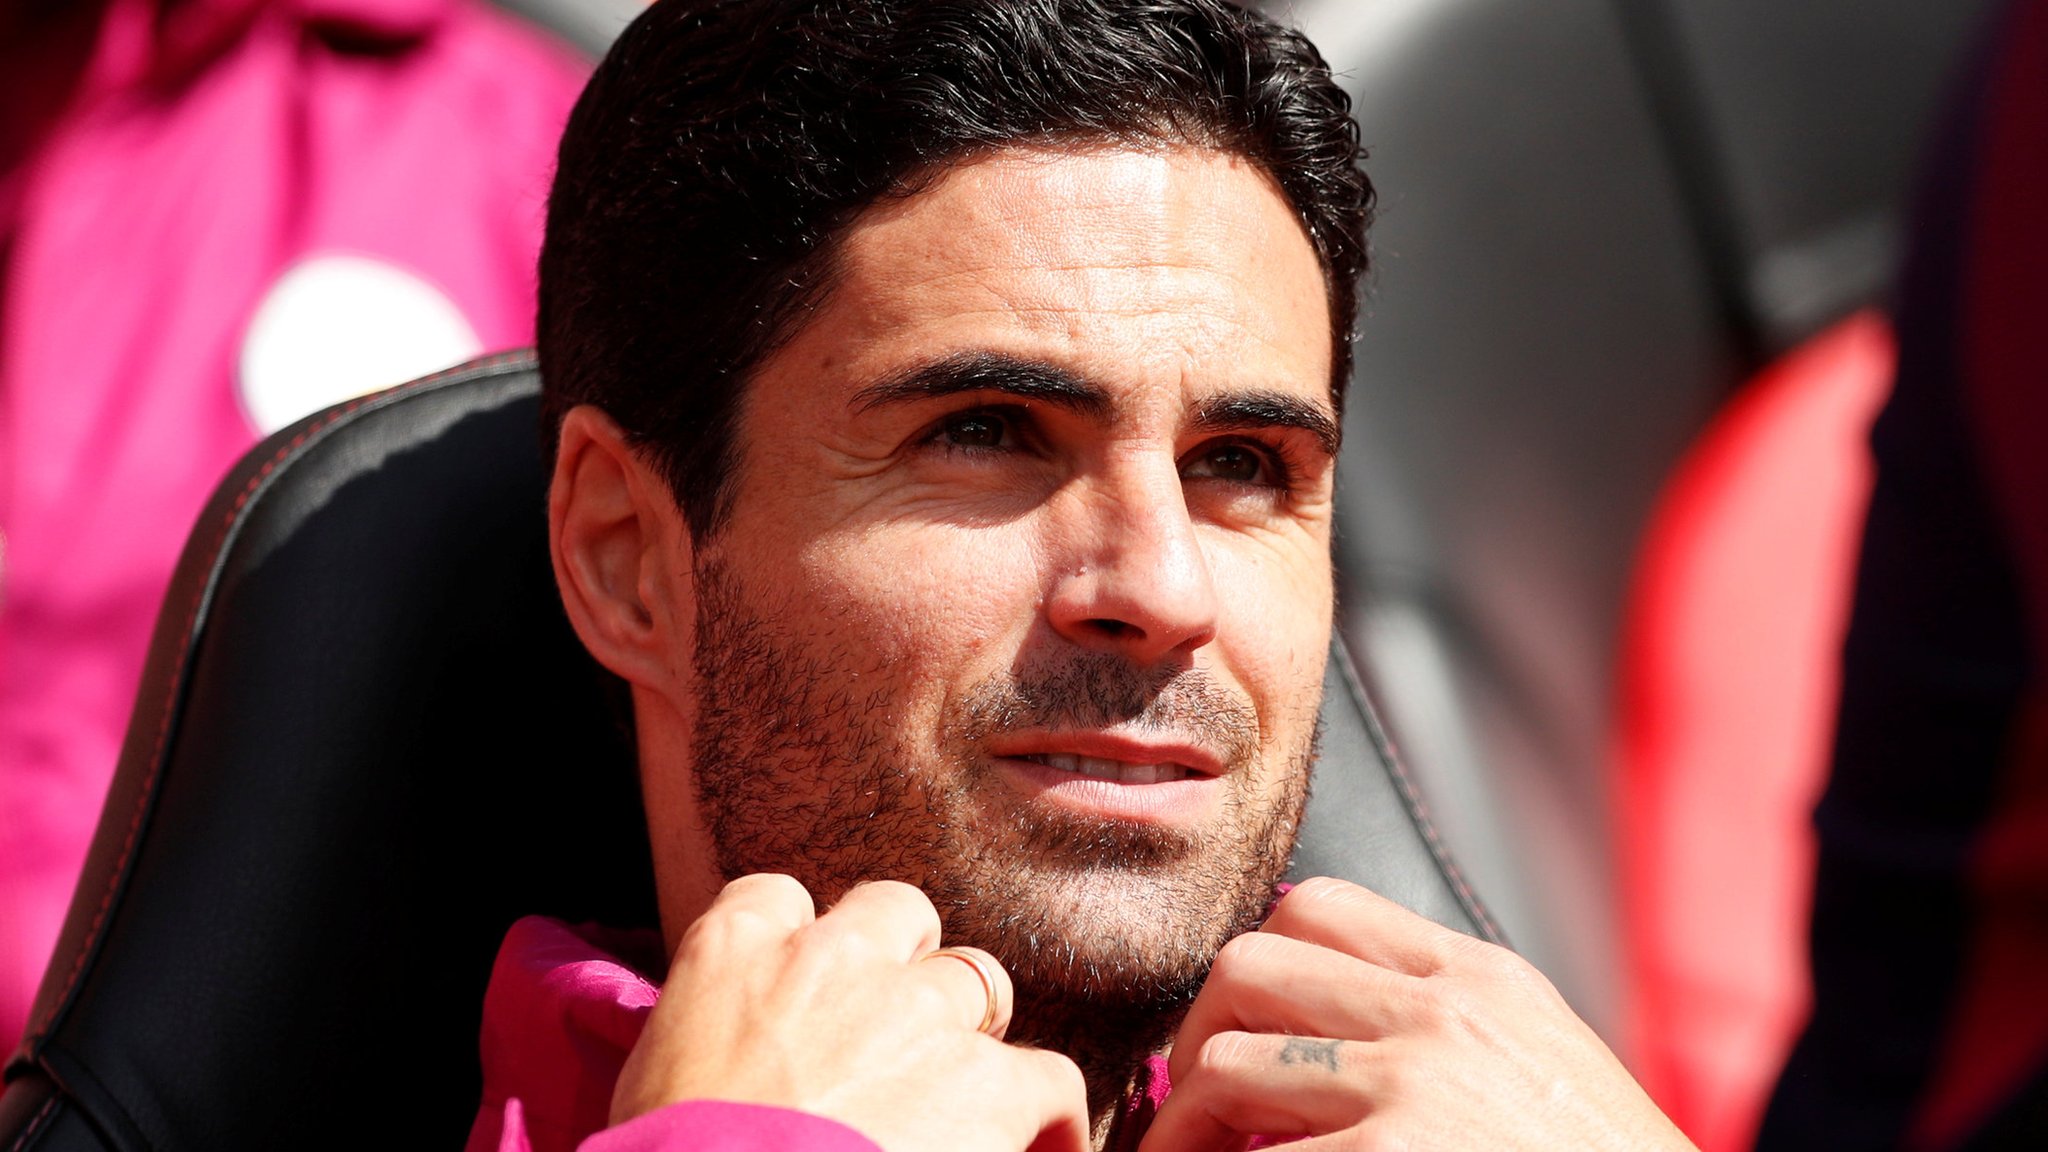 Arteta  has all the qualities' required to become Arsenal manager - Wenger